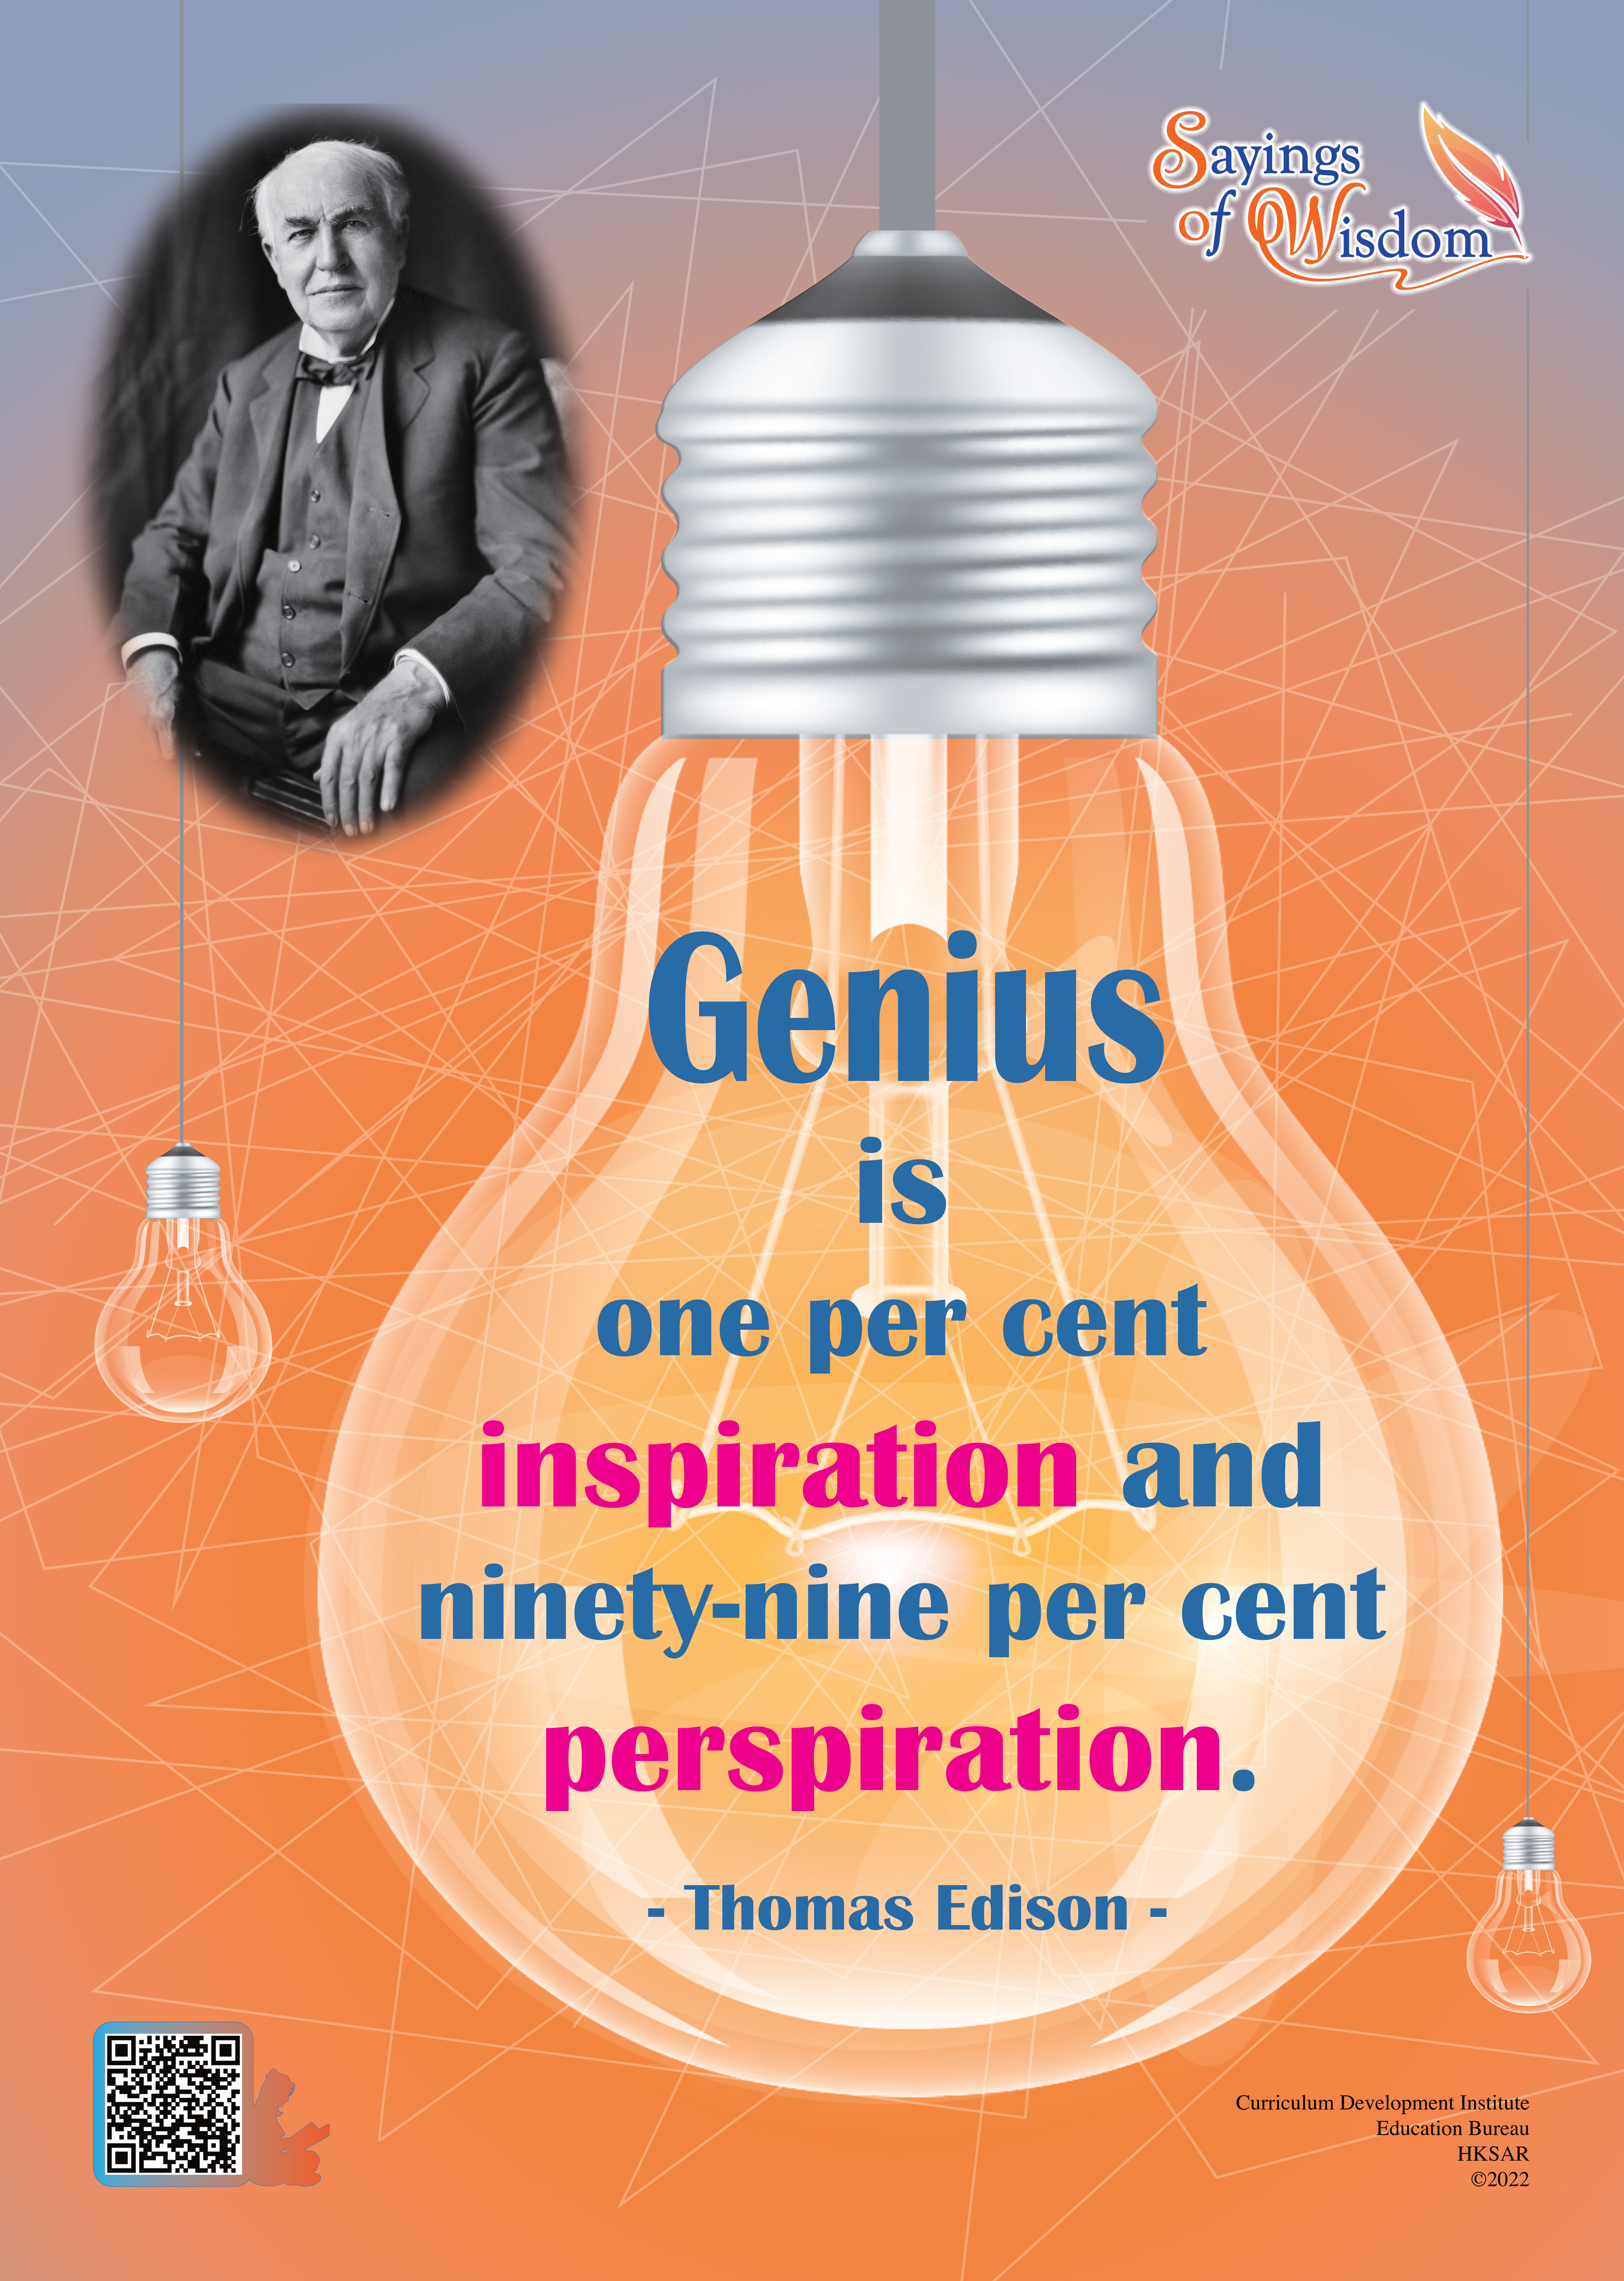 Genius is one per cent inspiration and ninety-nine per cent perspiration.